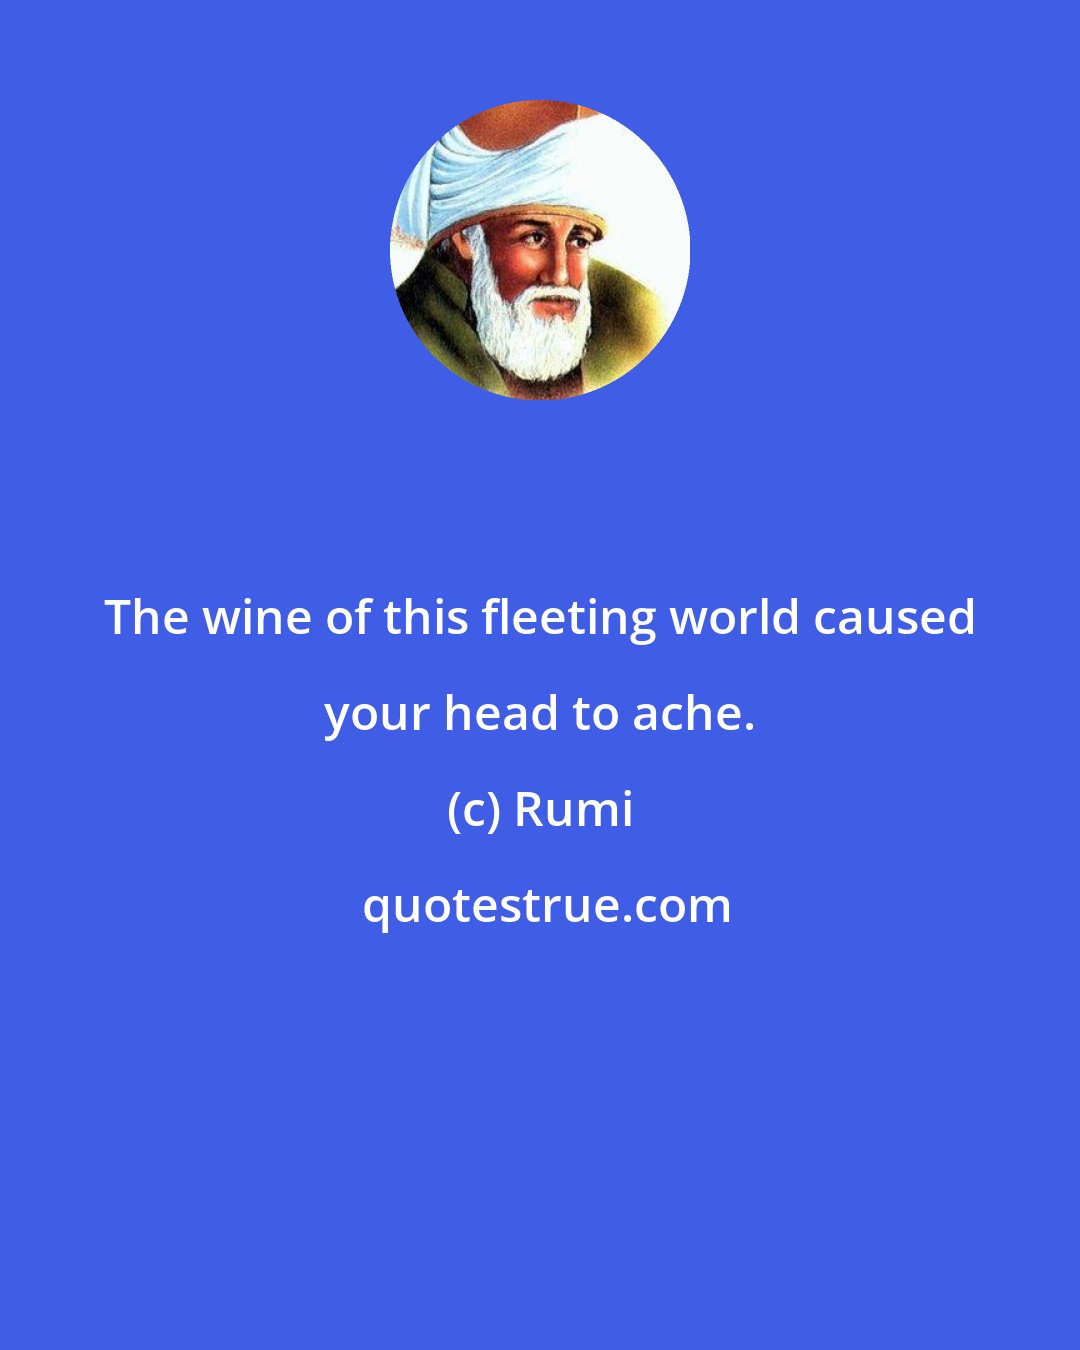 Rumi: The wine of this fleeting world caused your head to ache.